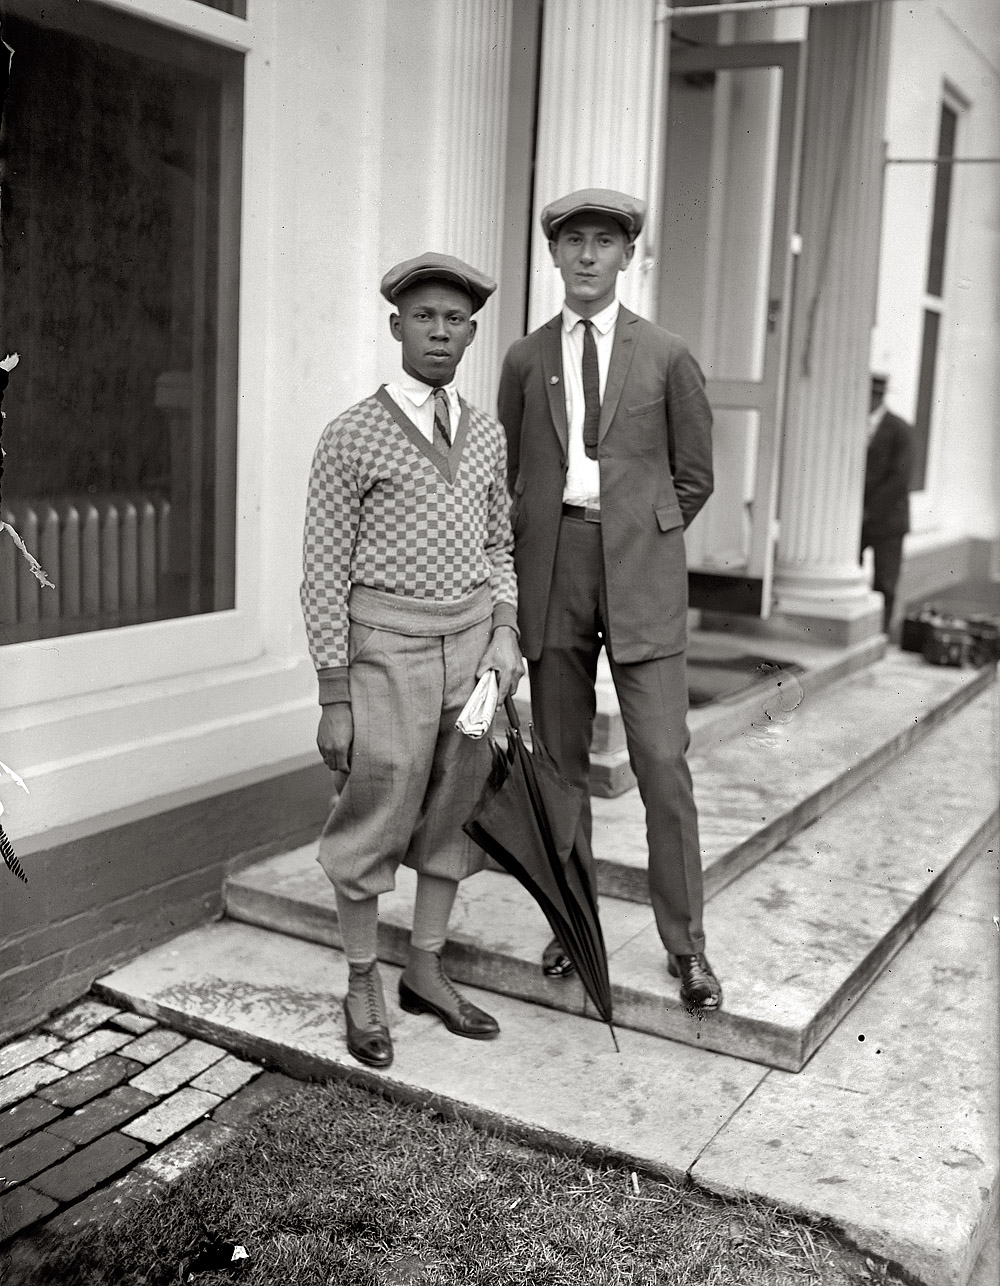 August 12, 1924. "International Boys Leagues. Thomas W. Miles and Simon Zebrock of Los Angeles at White House." View full size. National Photo Co.